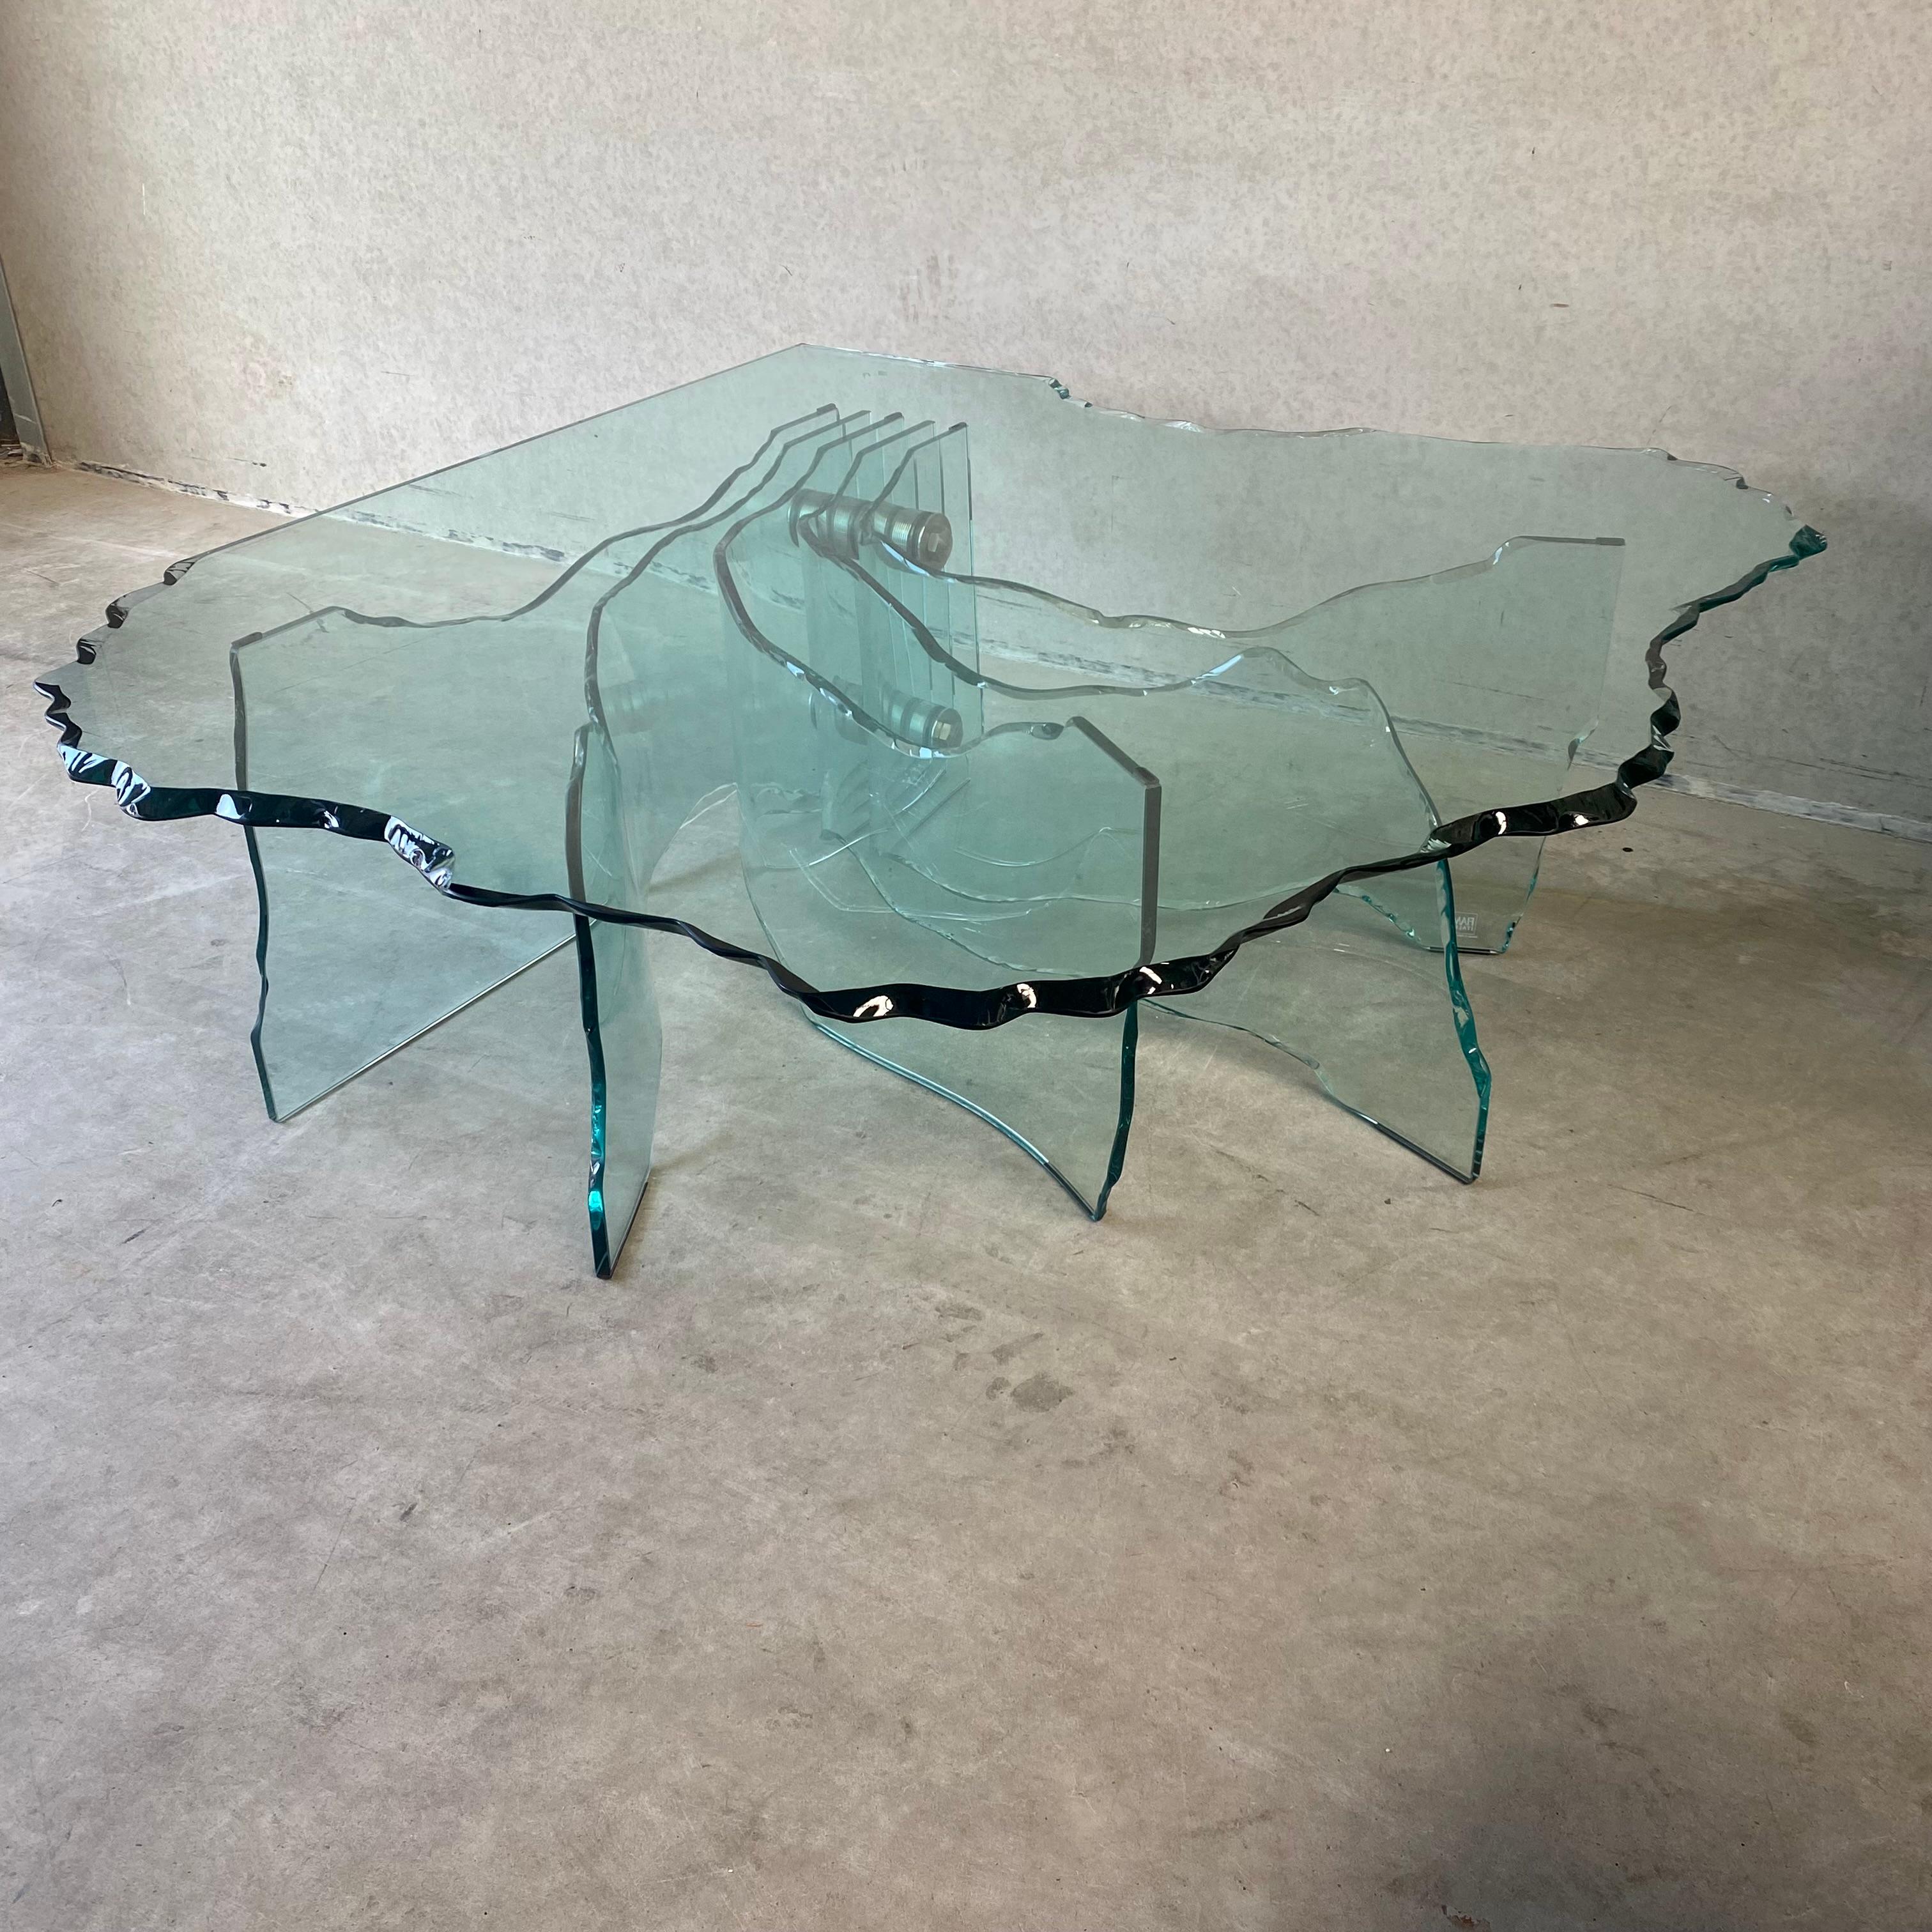 Introducing the breathtaking SHELL coffee table, a true masterpiece of design by the renowned artist Danny Lane for Fiam Italy. With its hand-sculpted elegance and exceptional condition, this stunning piece is sure to captivate any interior